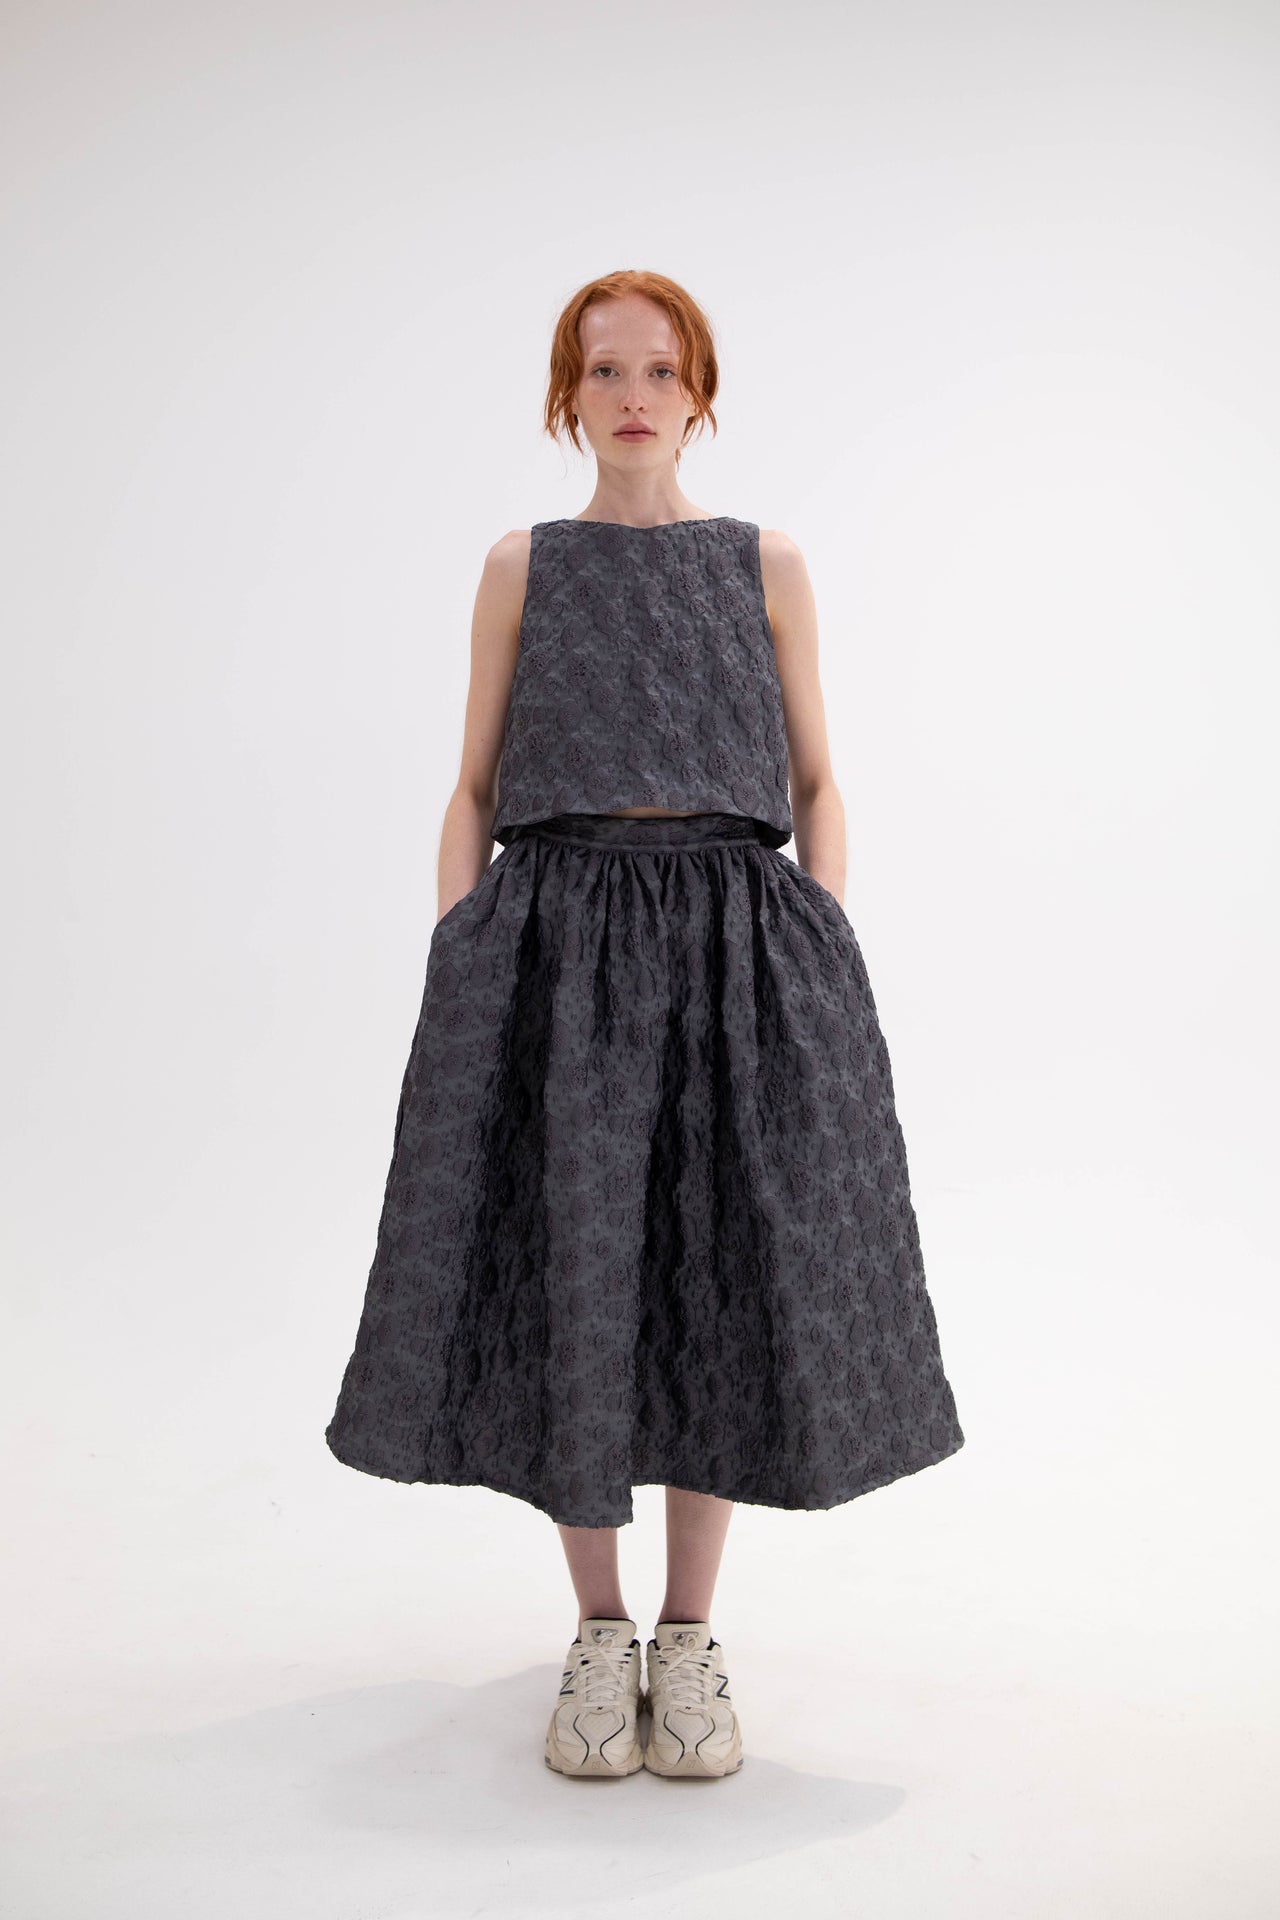 Monique grey, two piece ensemble with hand tied bow and cloud details, romantic and sophisticated